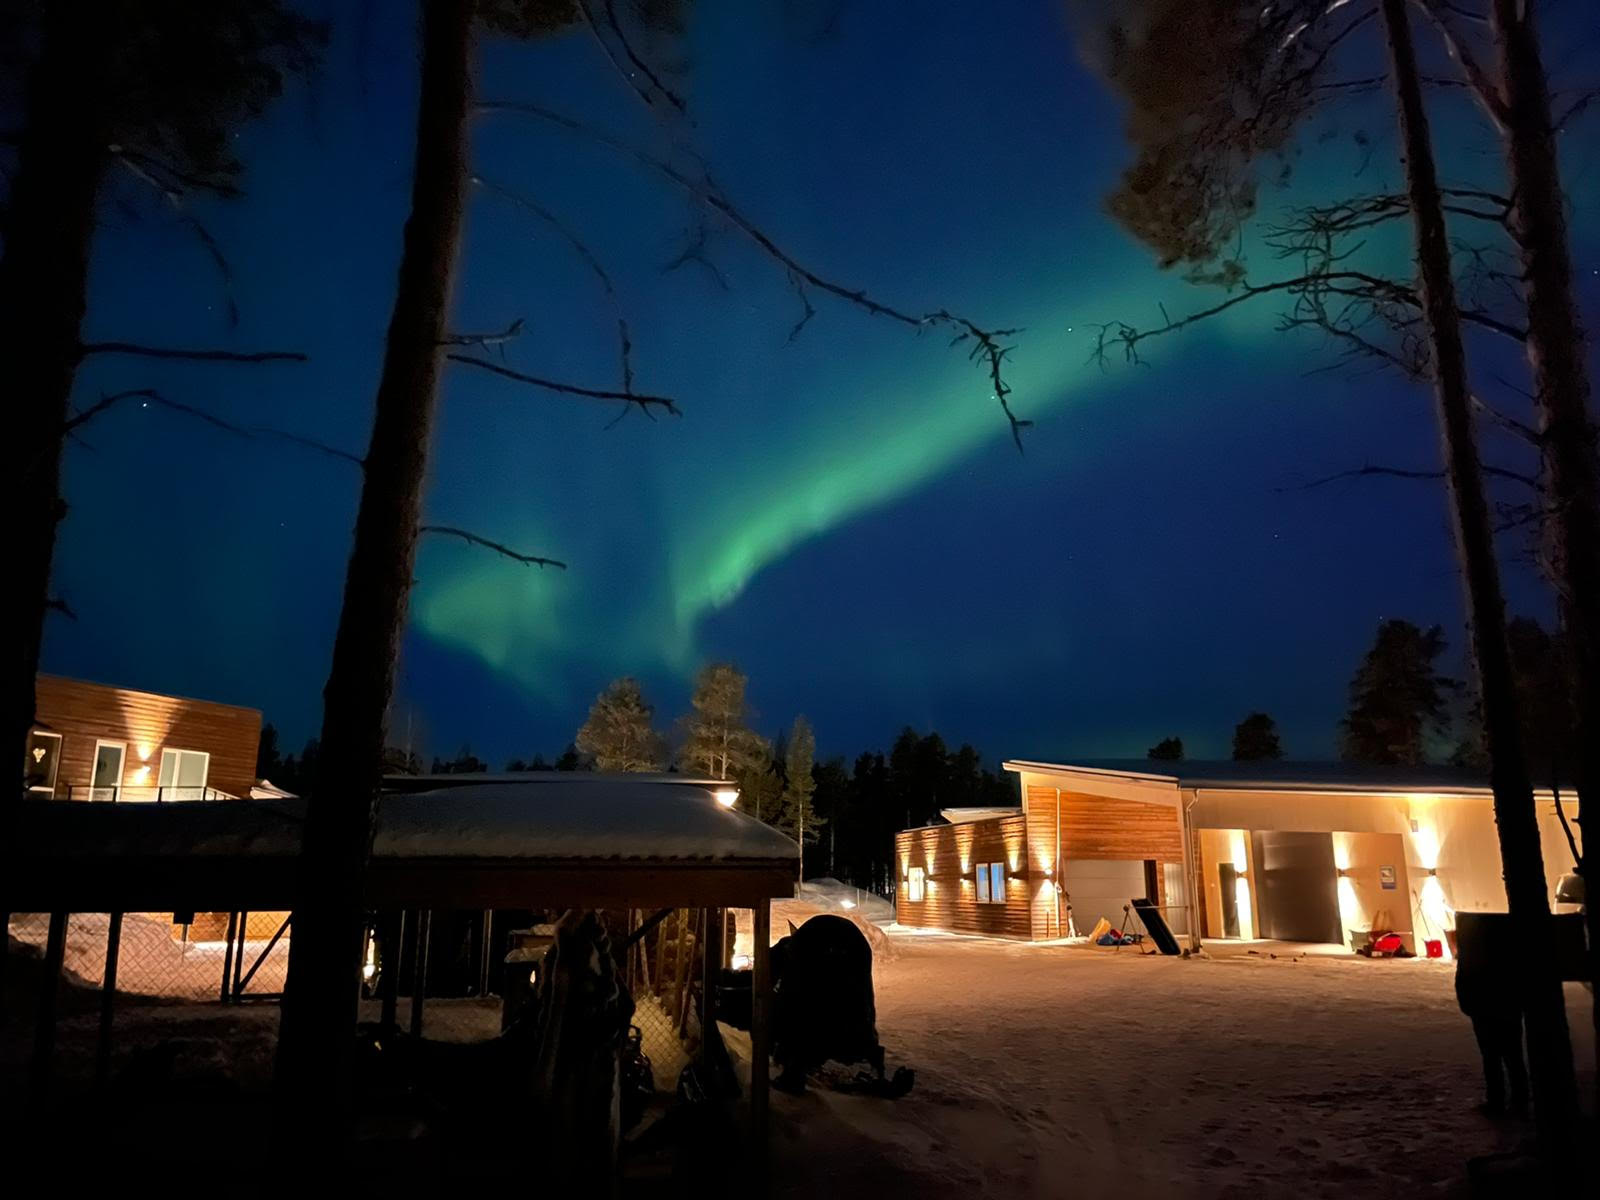 Northern lights over a settlement in the Arctic, Norway